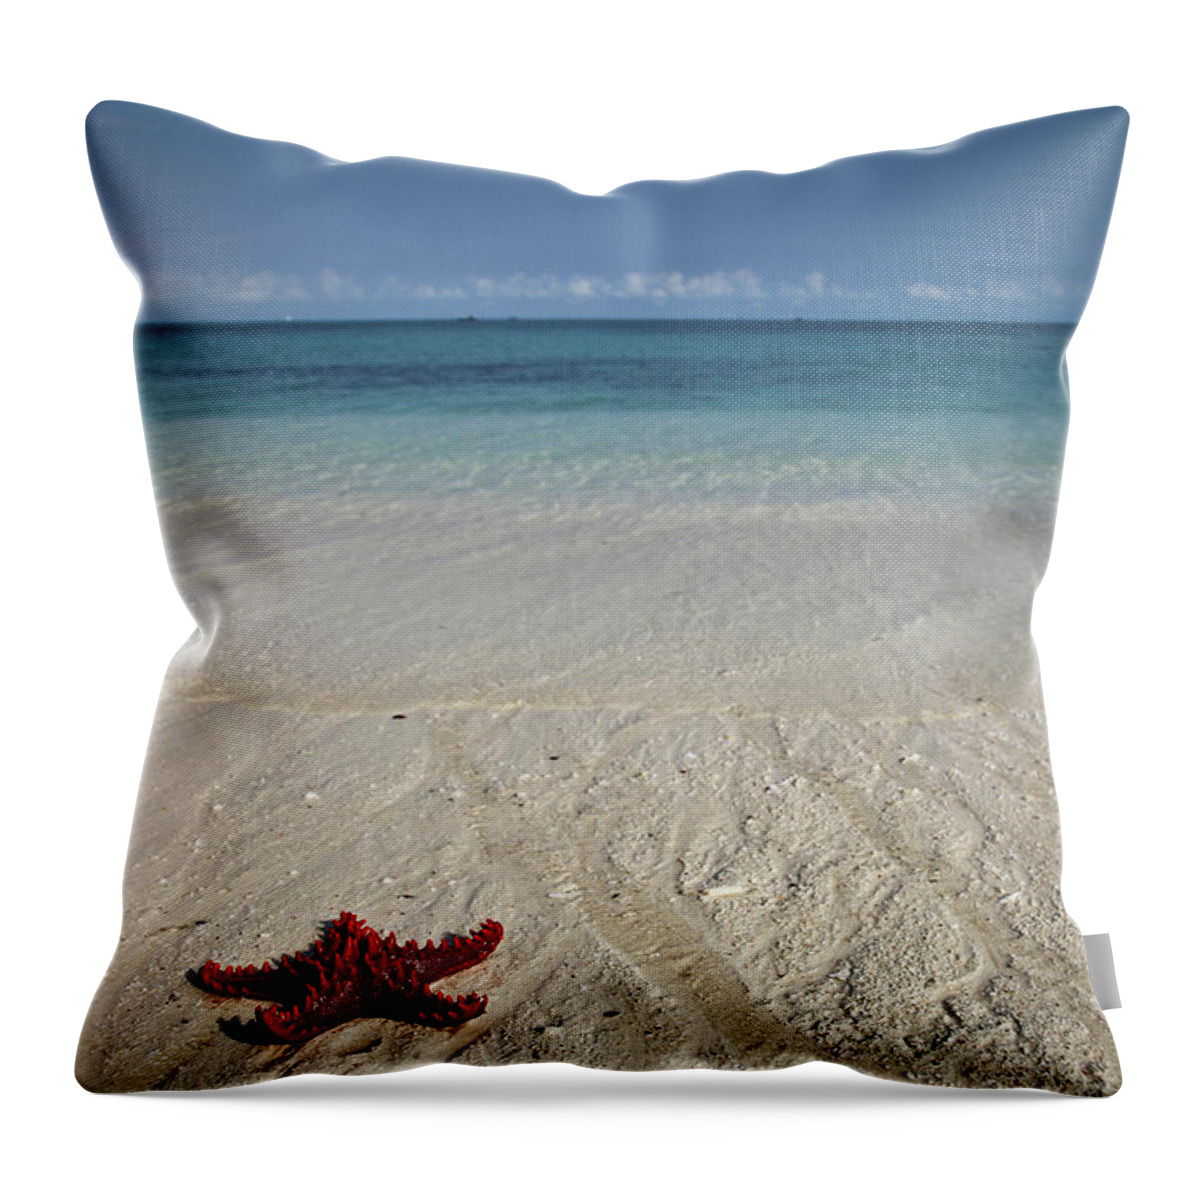 Tanzania Throw Pillow featuring the photograph Red Sea Star by Alessandro Capurso